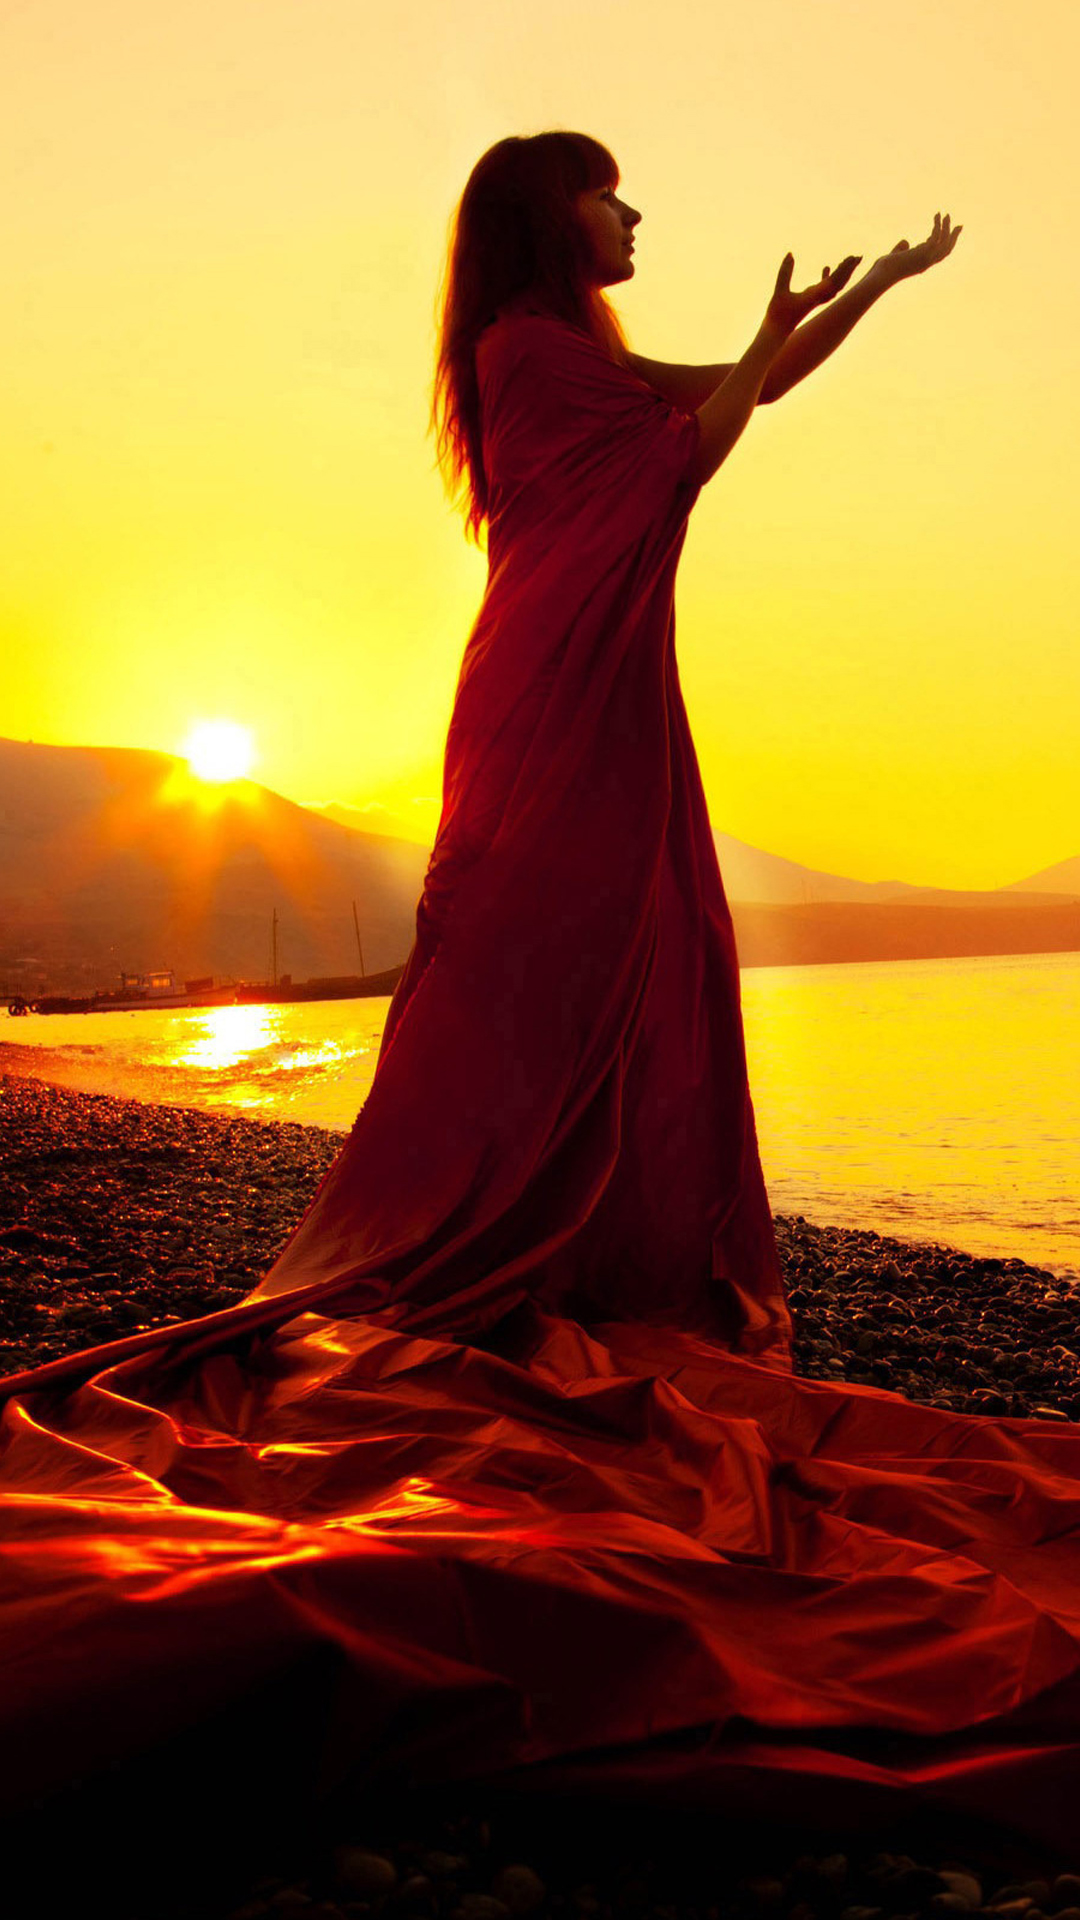 Sunset Angel iPhone Wallpaper HD For